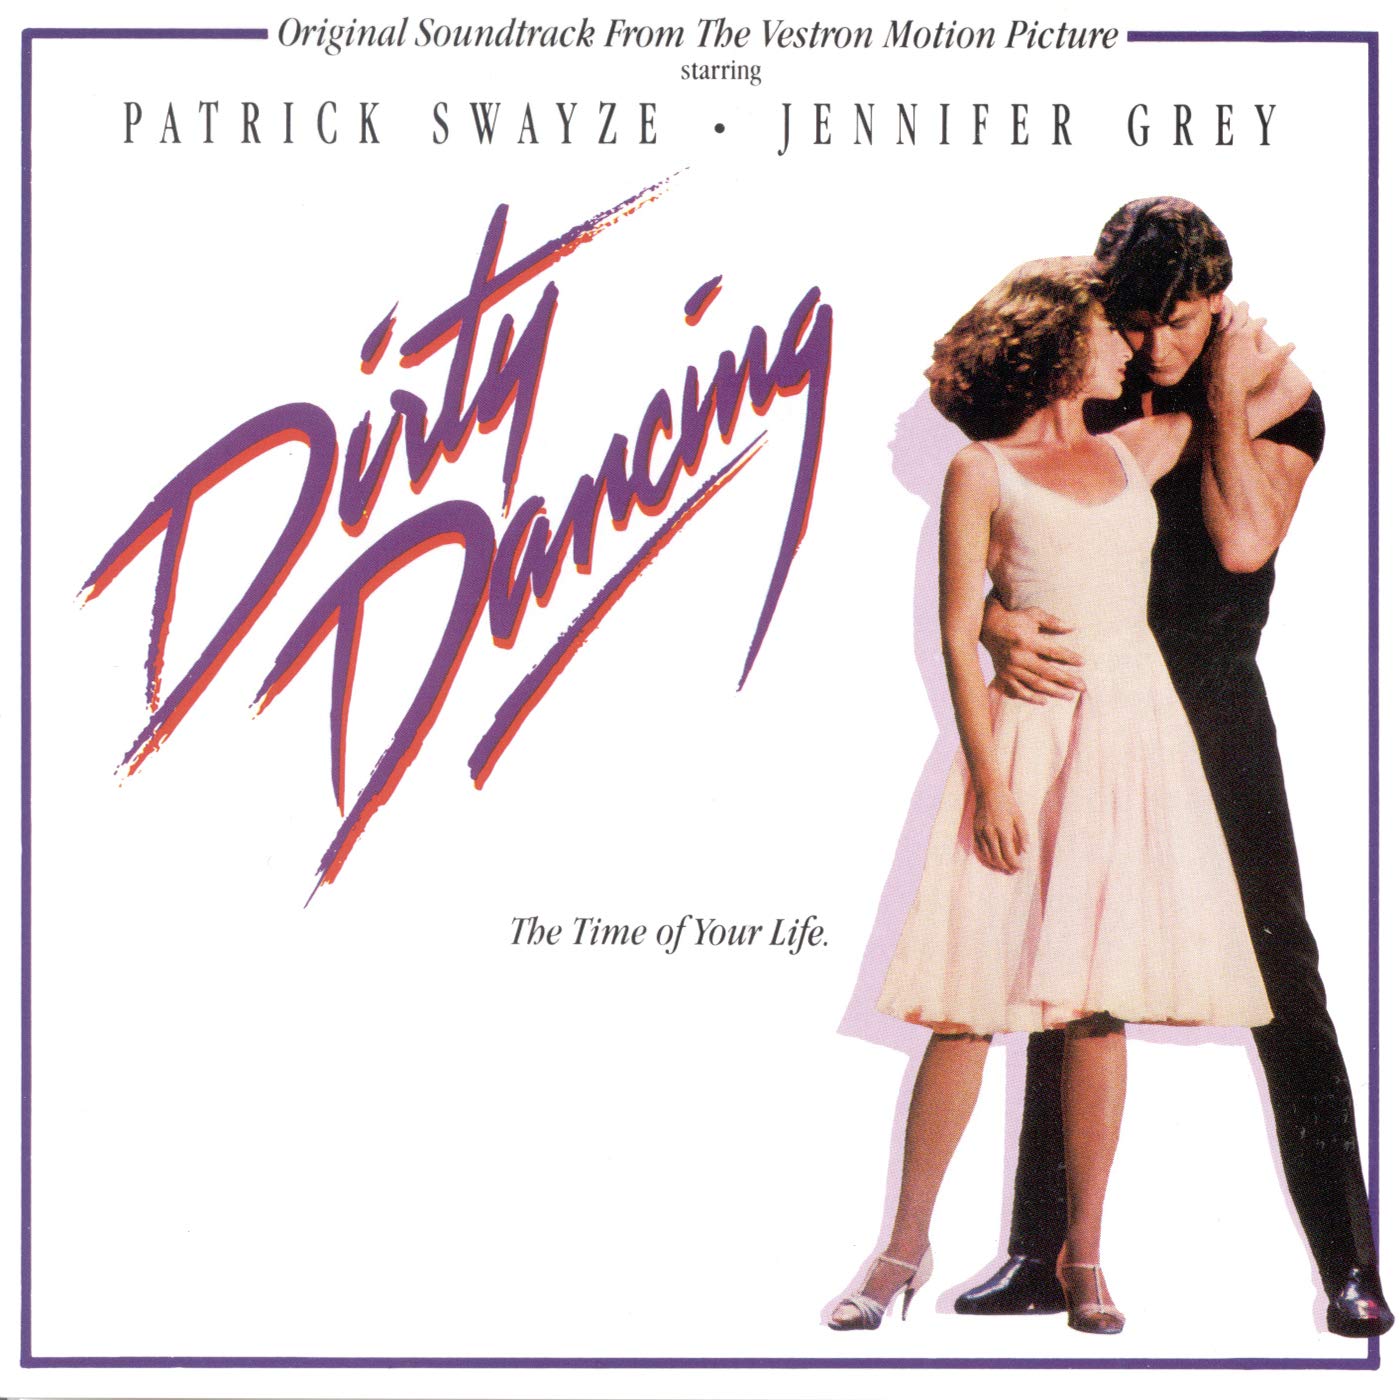 She's Like the Wind dirty dancing colonna sonora film 1987